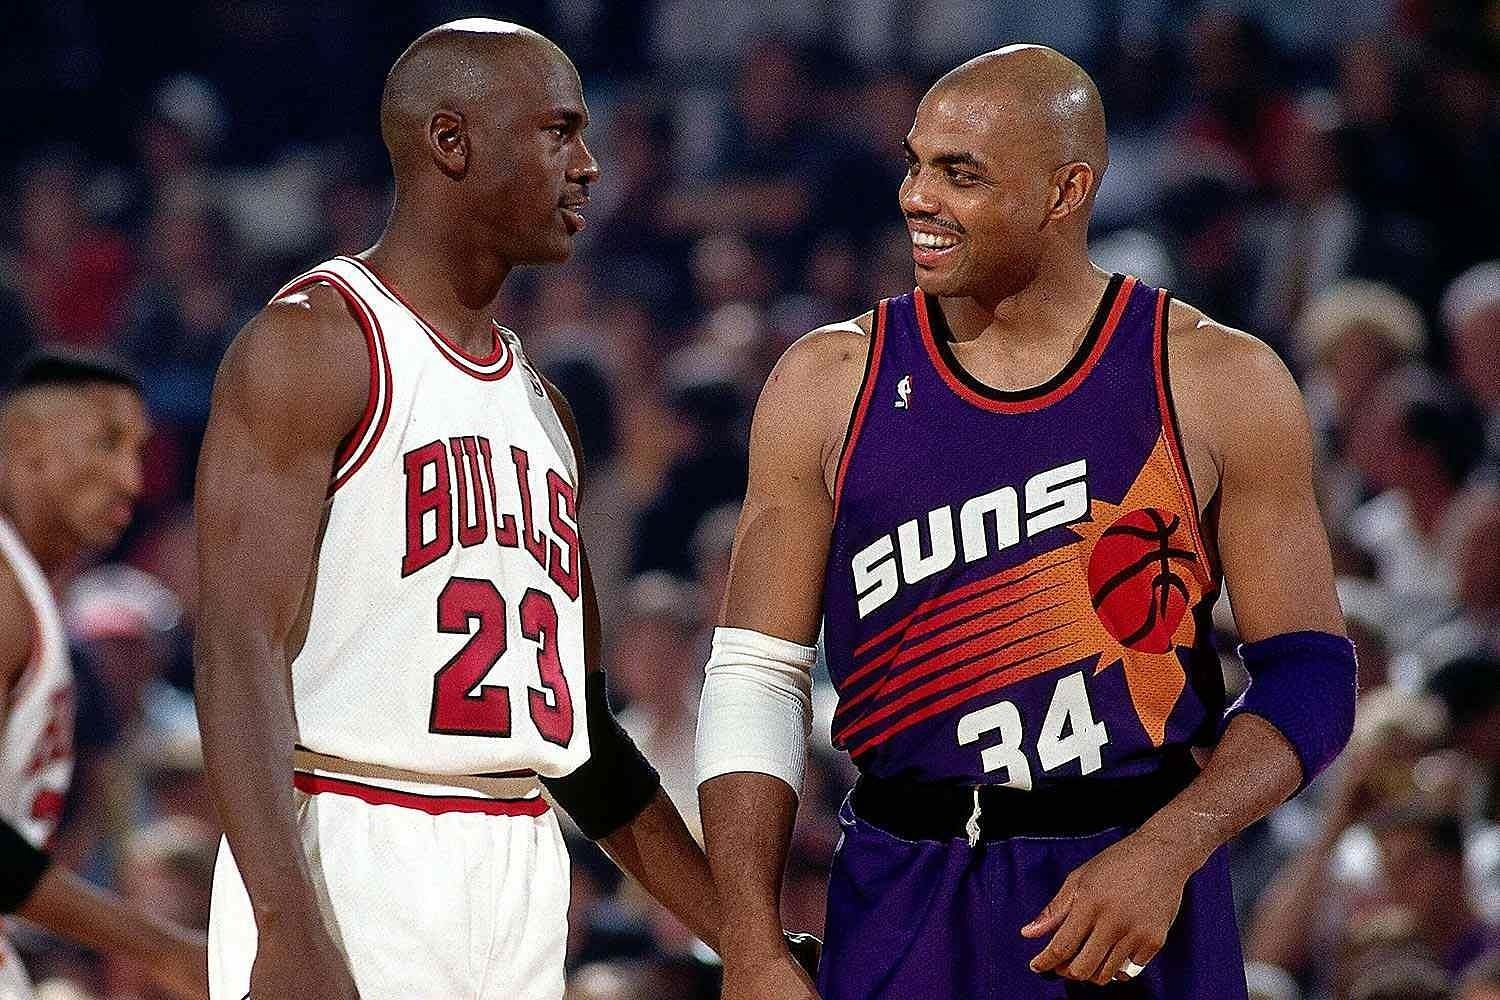 Michael Jordan and Charles Barkley share a laugh during their NBA days(Image Via Getty)